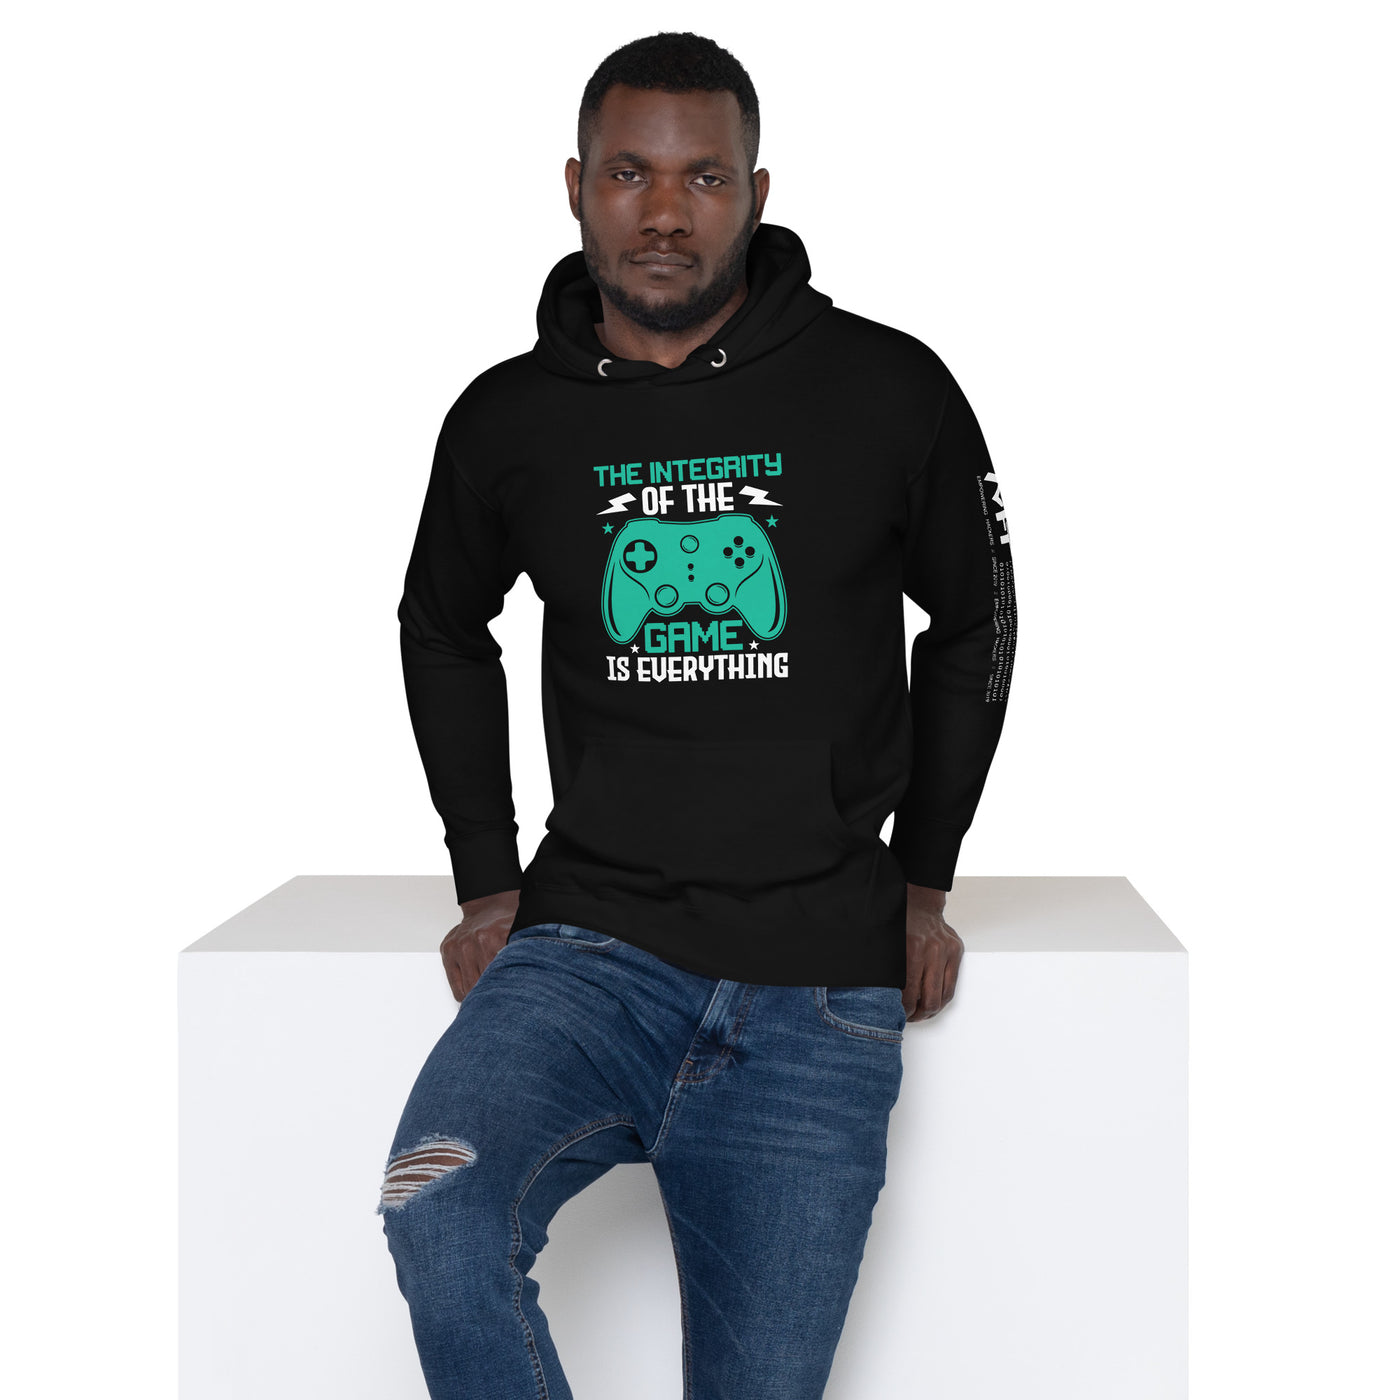 The Integrity of the Game is Everything (Swarna) - Unisex Hoodie